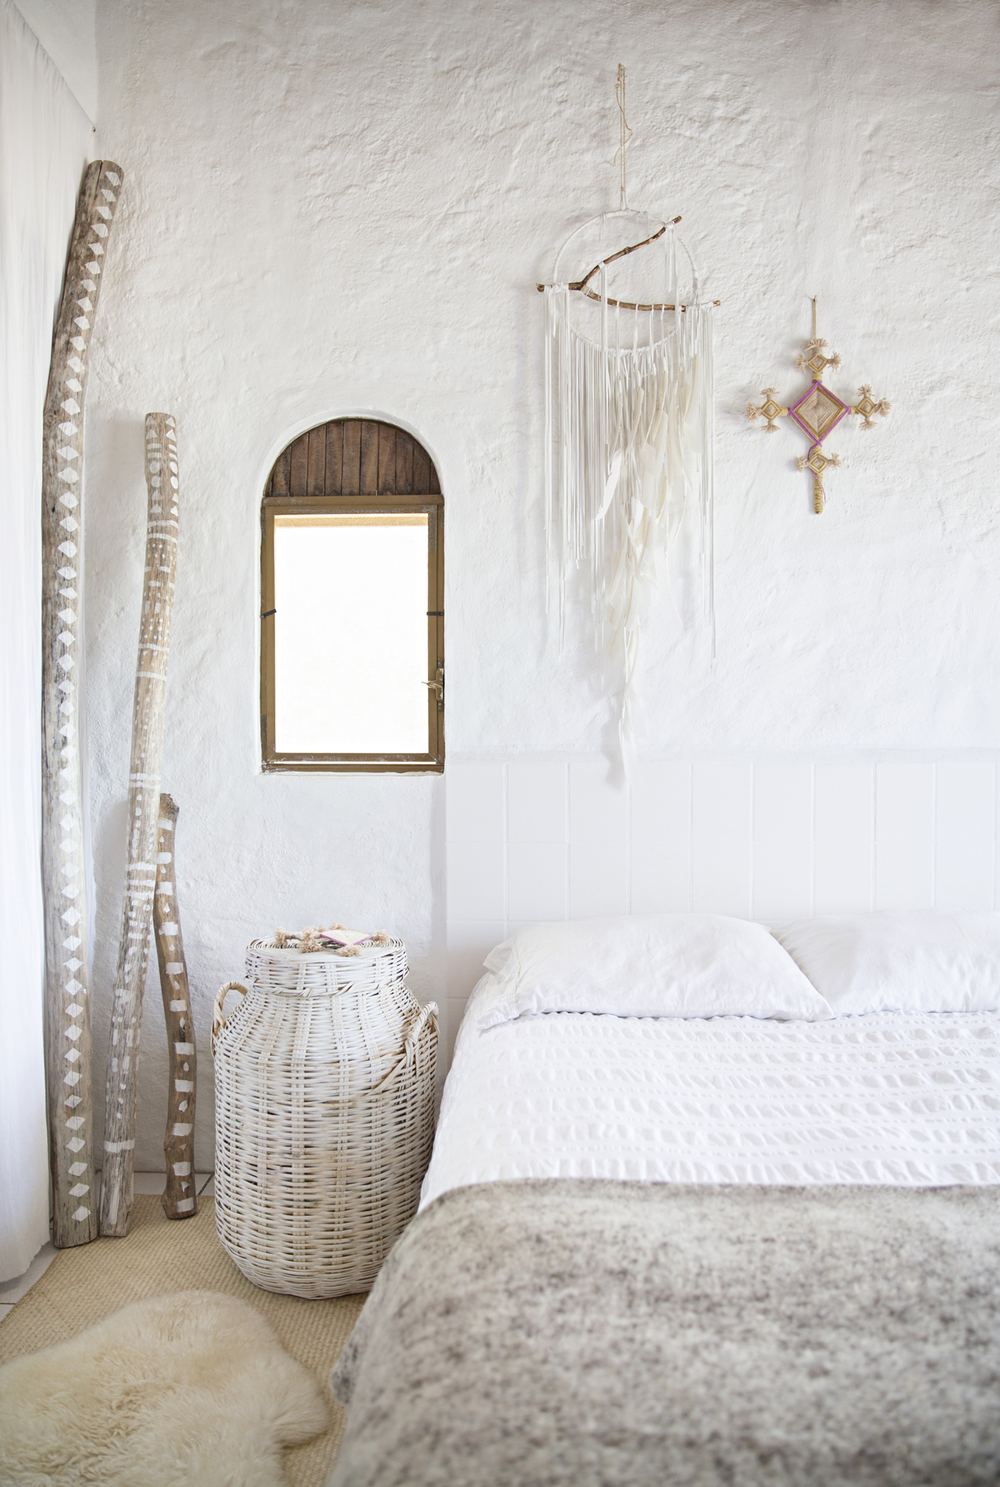 Boho Chic Home With Mexican Decor Touches | DigsDigs